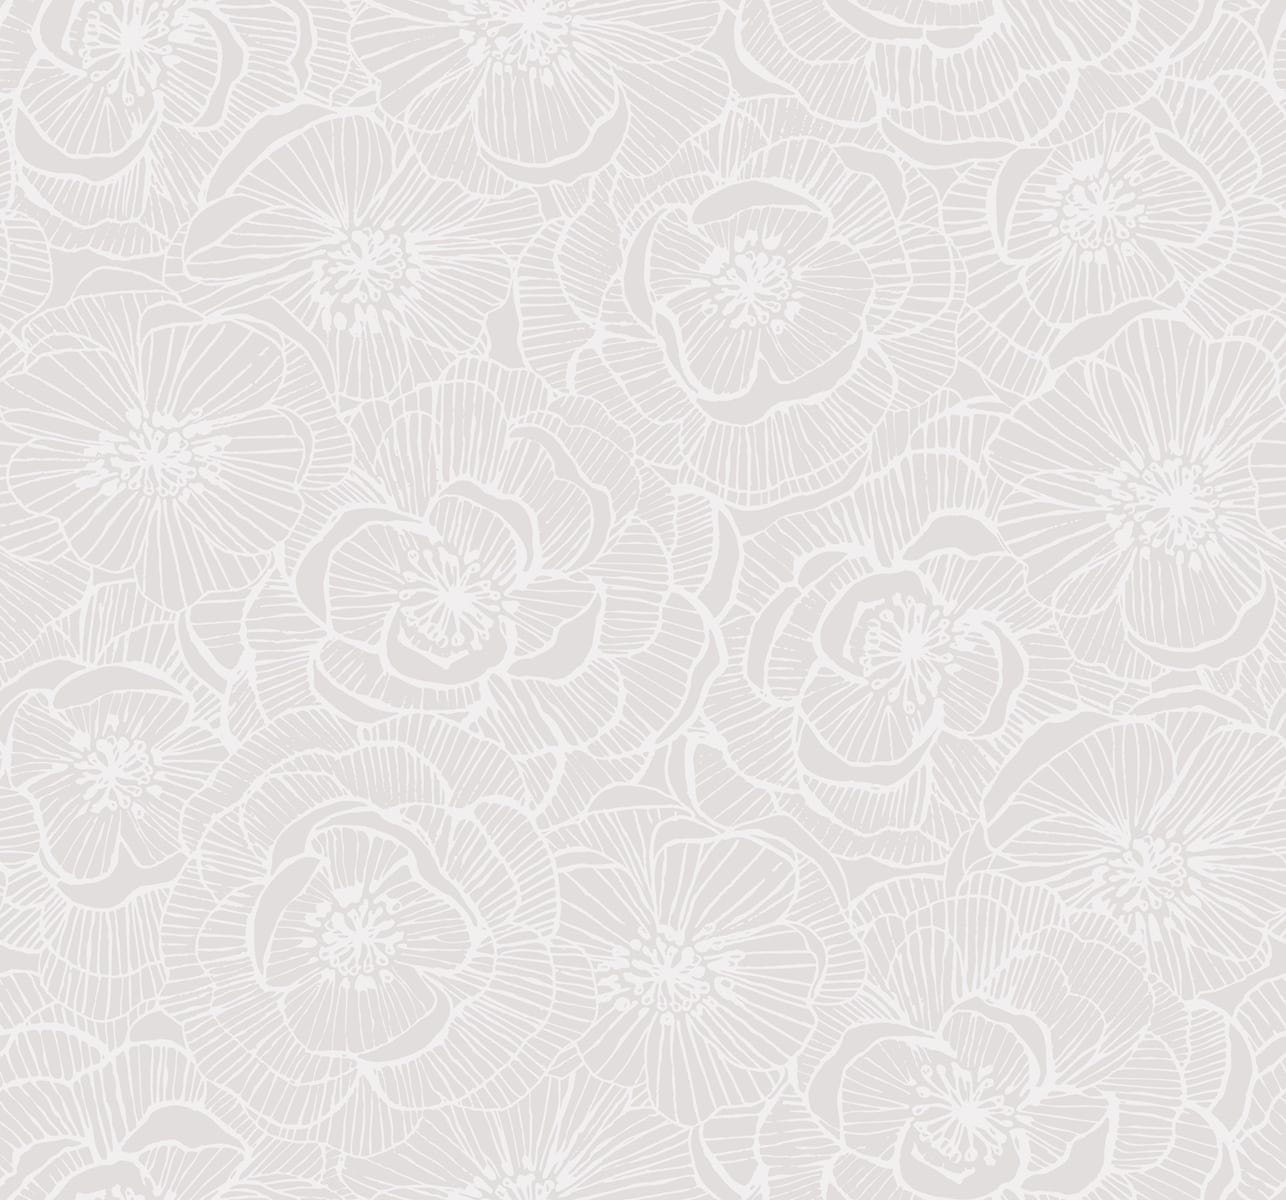 Seabrook Designs AW71001 Casa Blanca 2 Graphic Floral  Wallpaper Metallic Champagne and Off-White